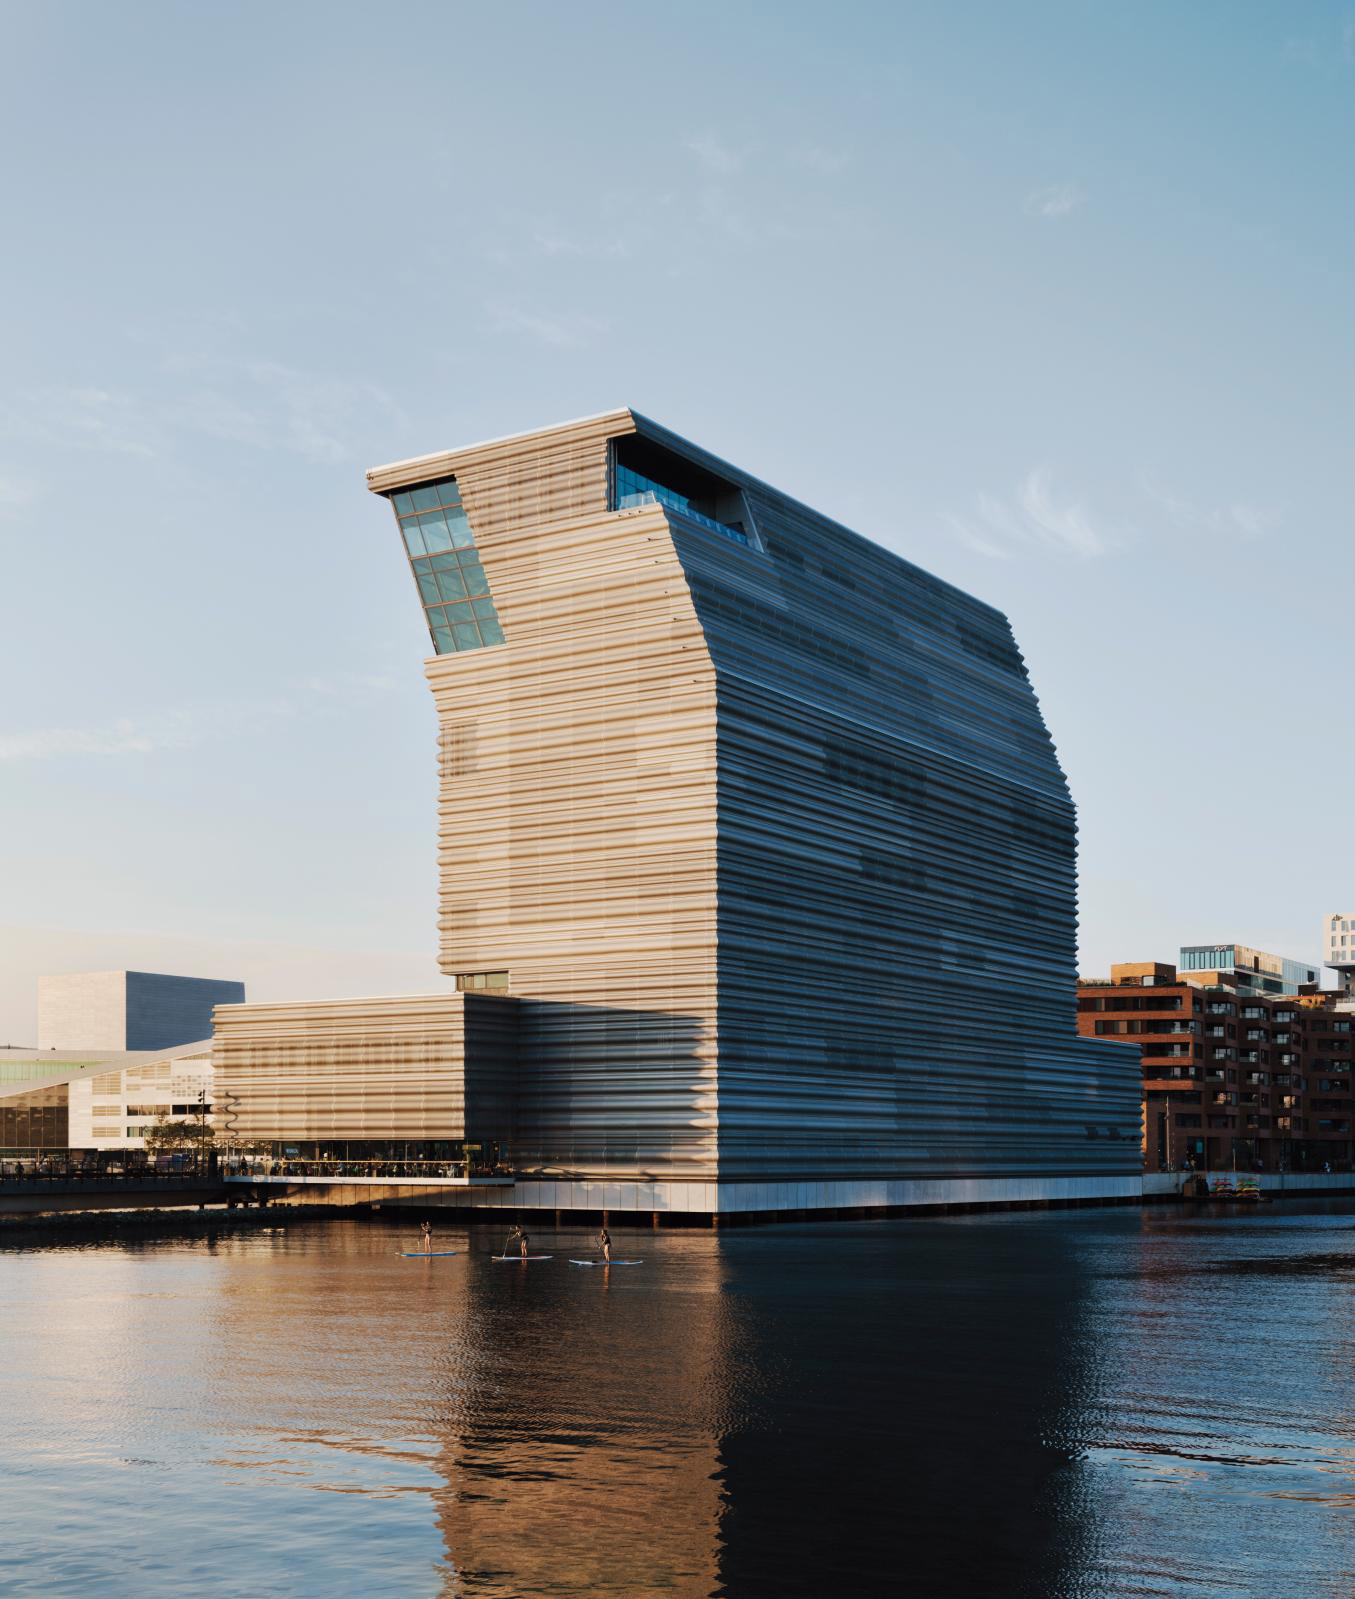 The New Munch Museum in Oslo